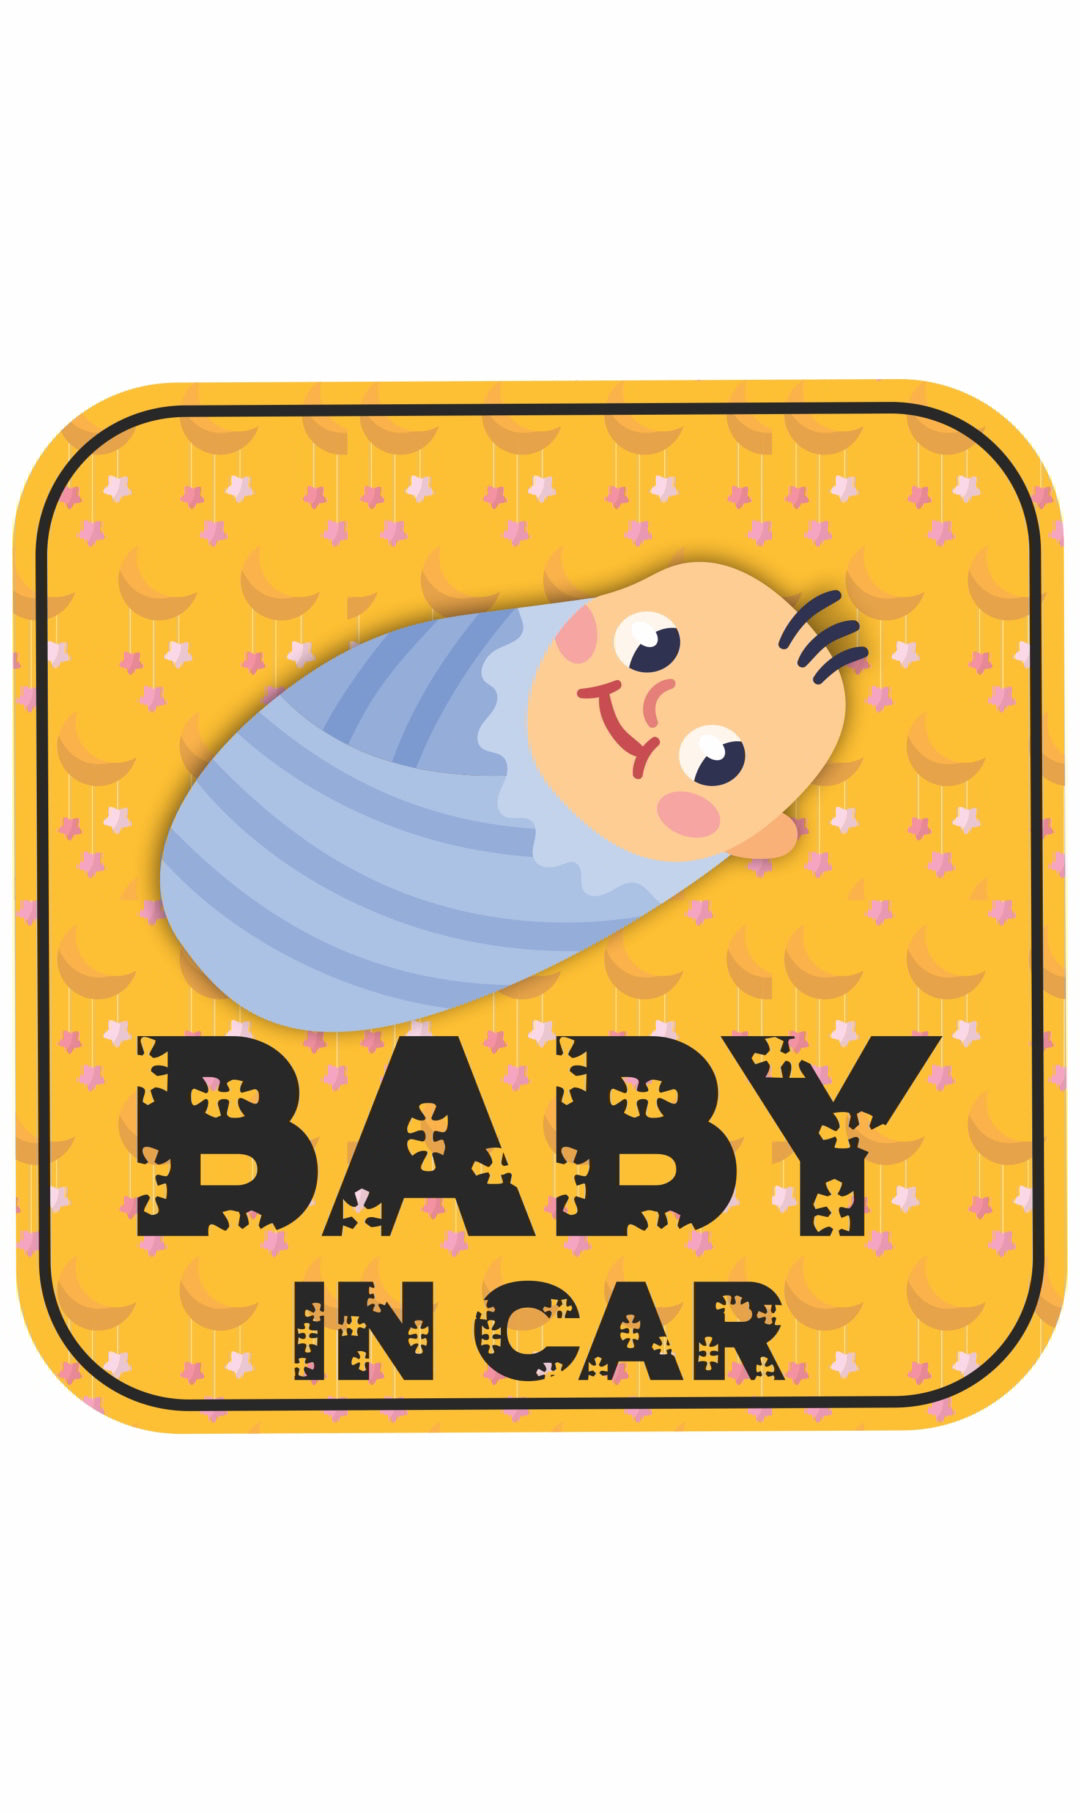 Baby in Car Decal Sticker(2pc)_c28